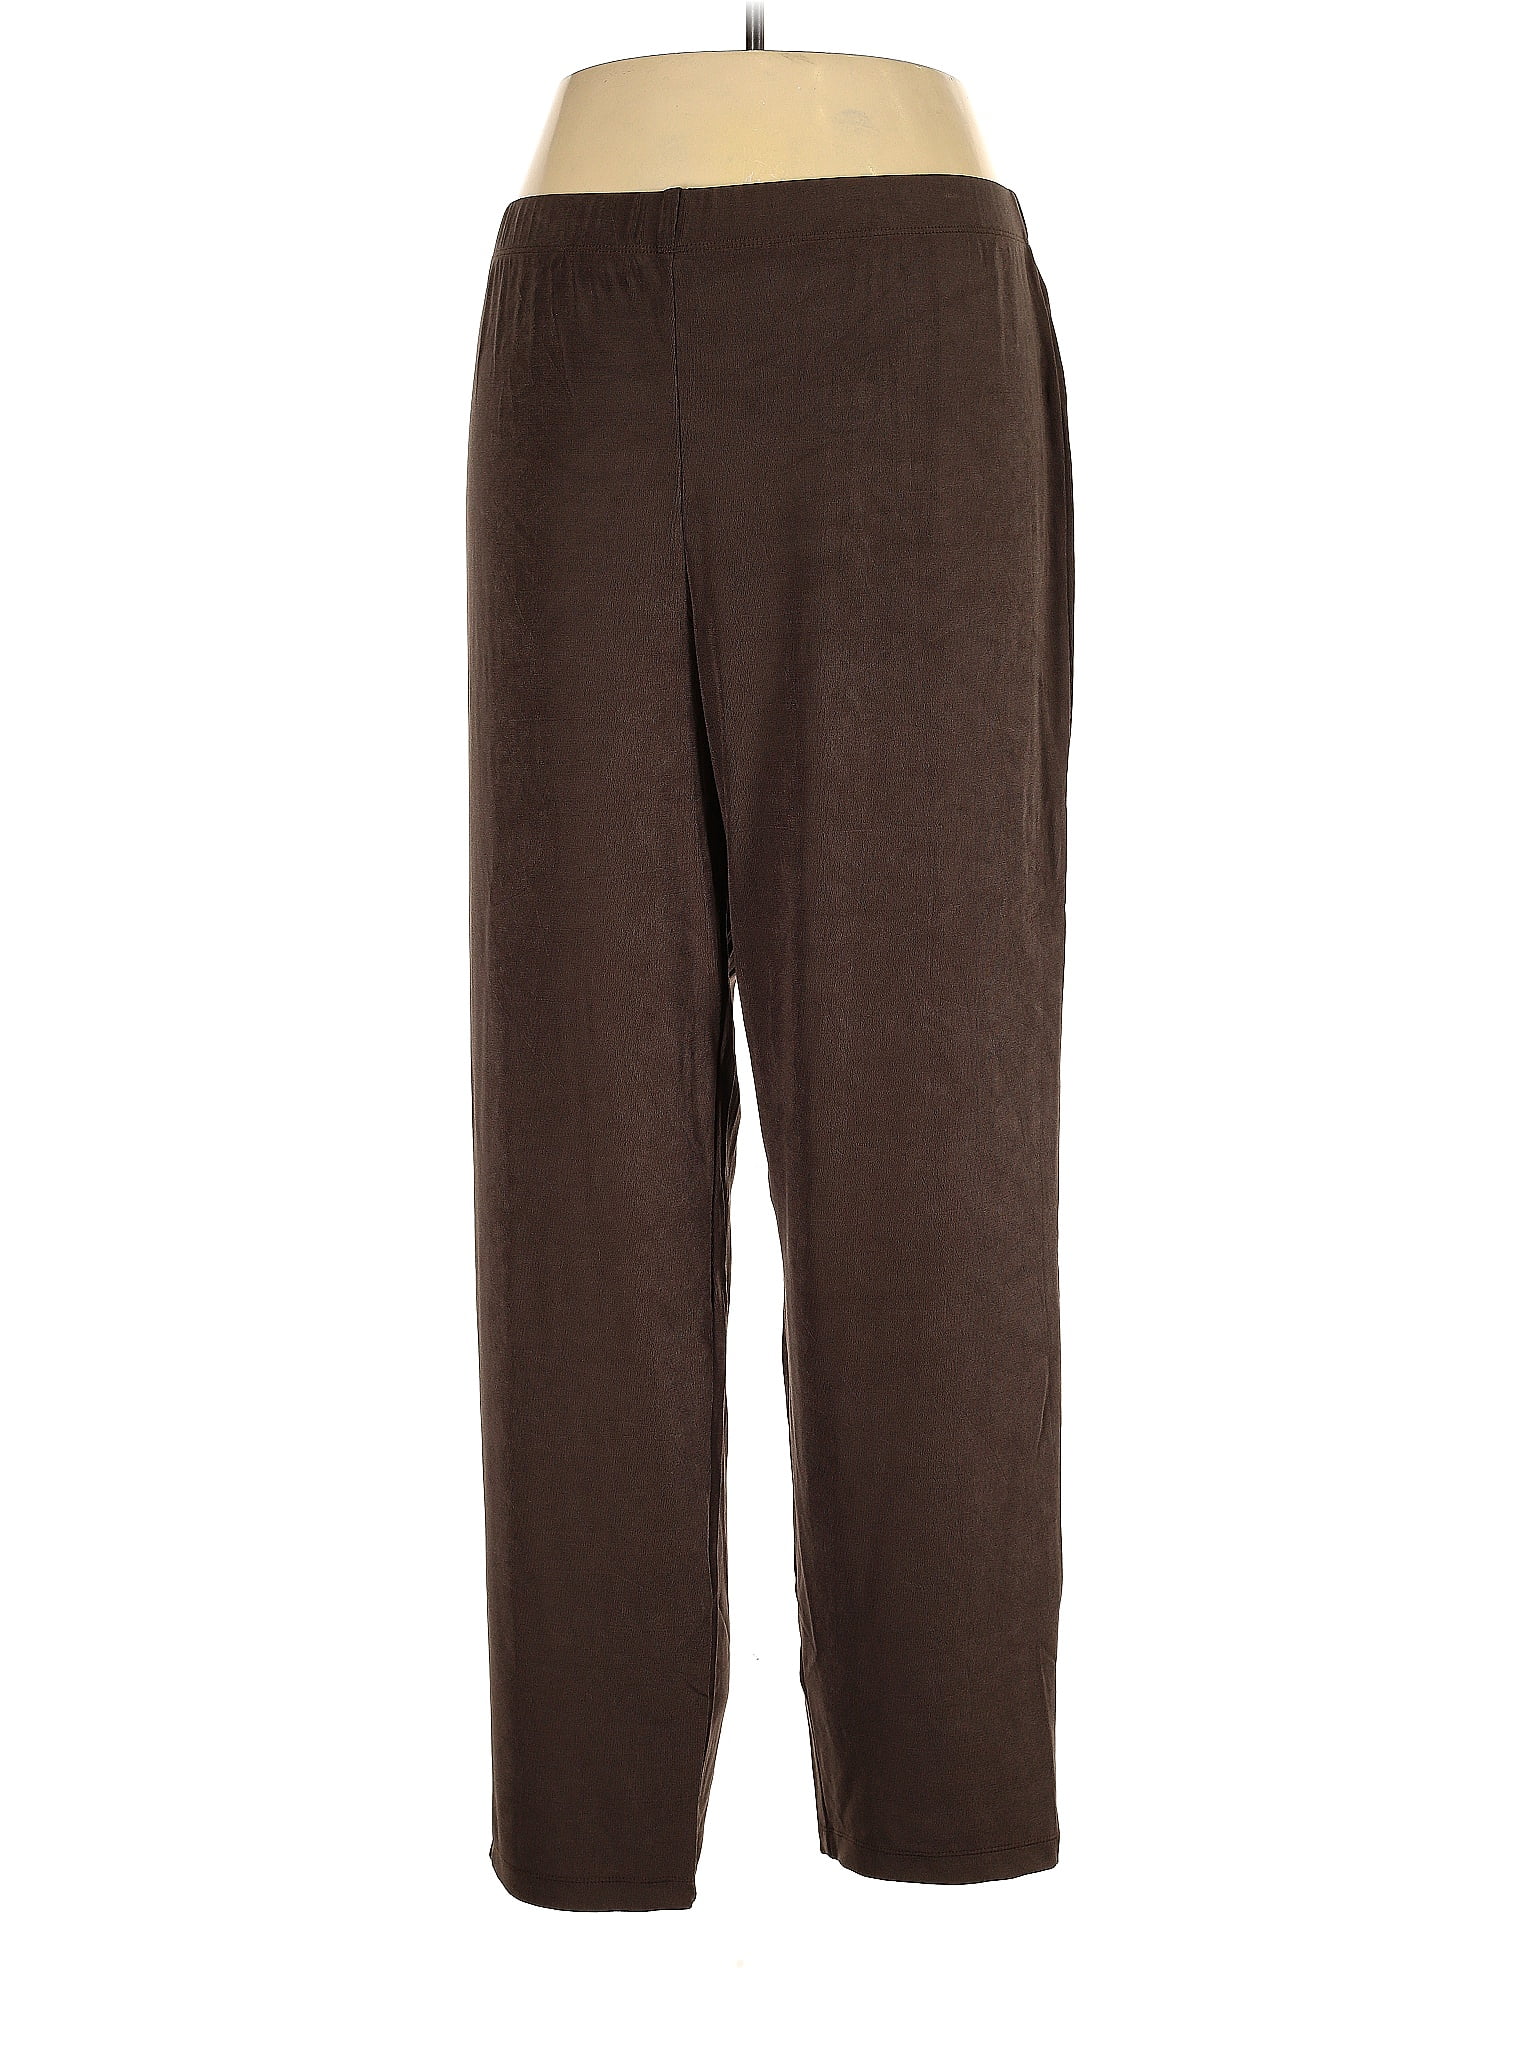 Chico's Solid Brown Casual Pants Size XXL Tall (4) (Tall) - 76% off ...